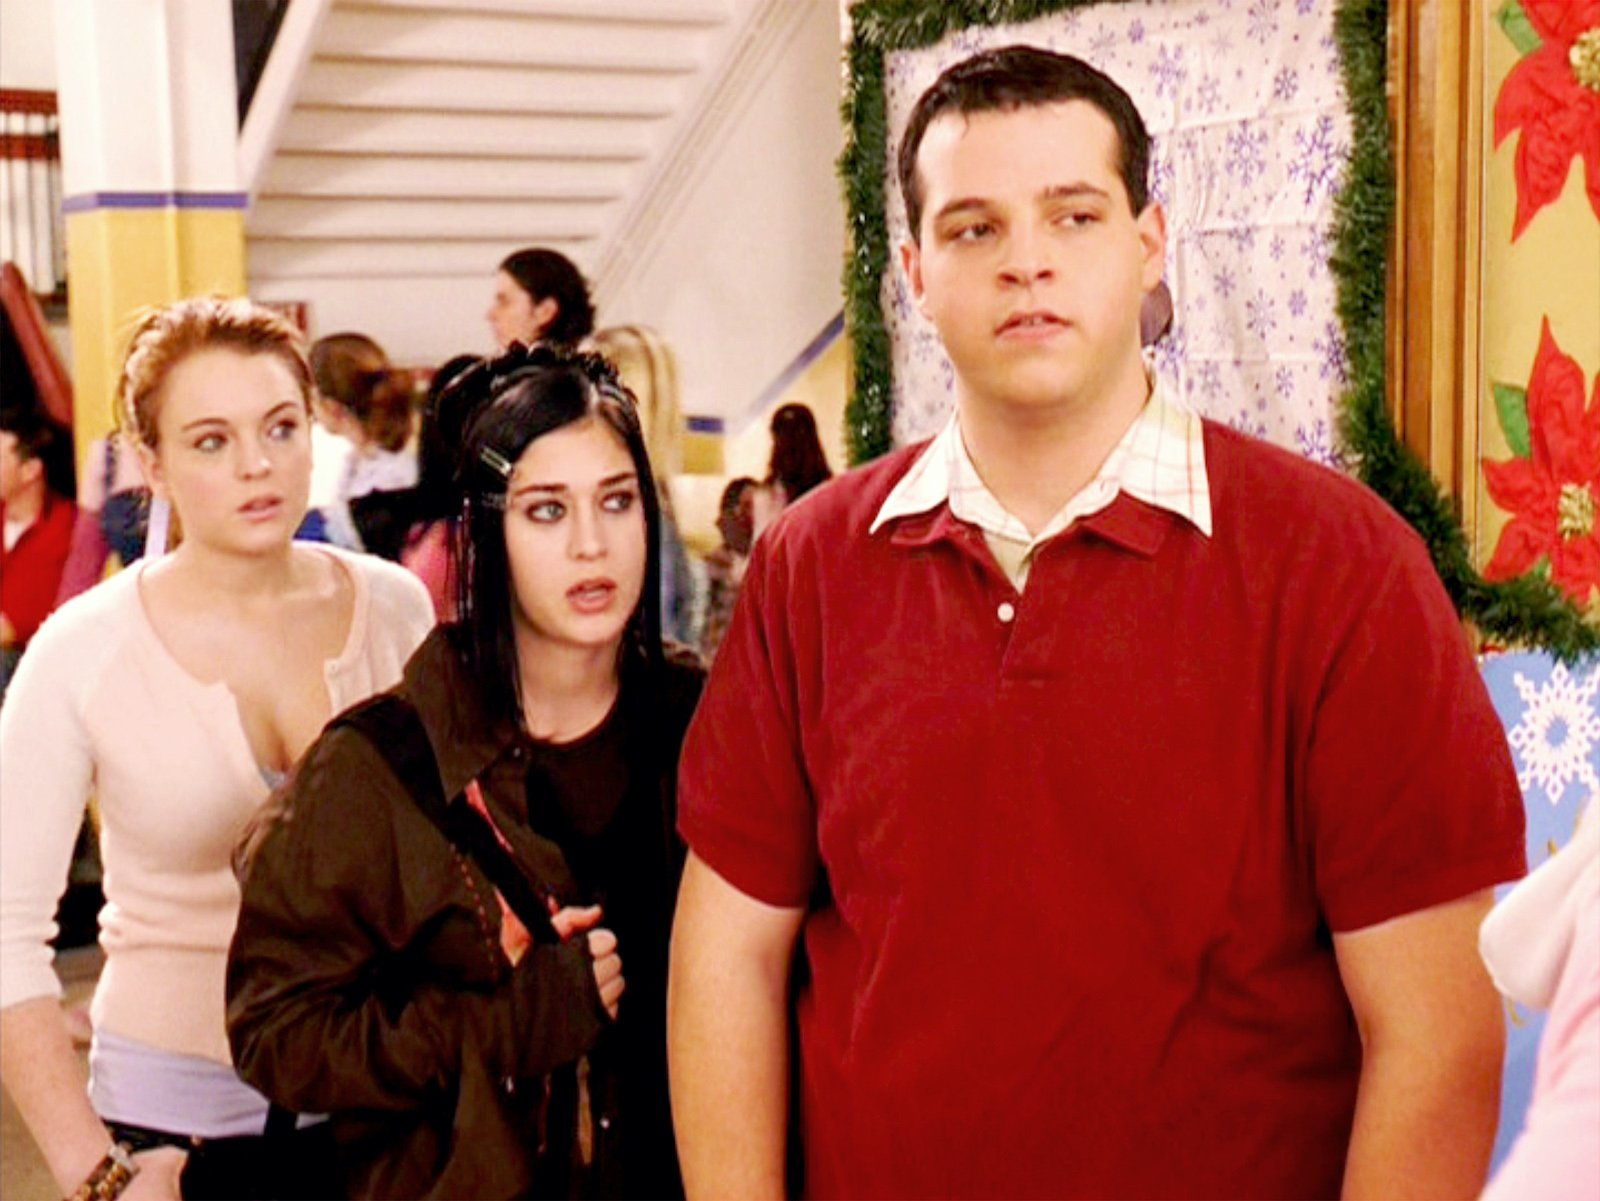 Mean Girls cast Lindsay Lohan (as Cady Heron), Lizzy Caplan (as Janis Ian) and Daniel Franzese (as Damian) stand next to each other looking surprised